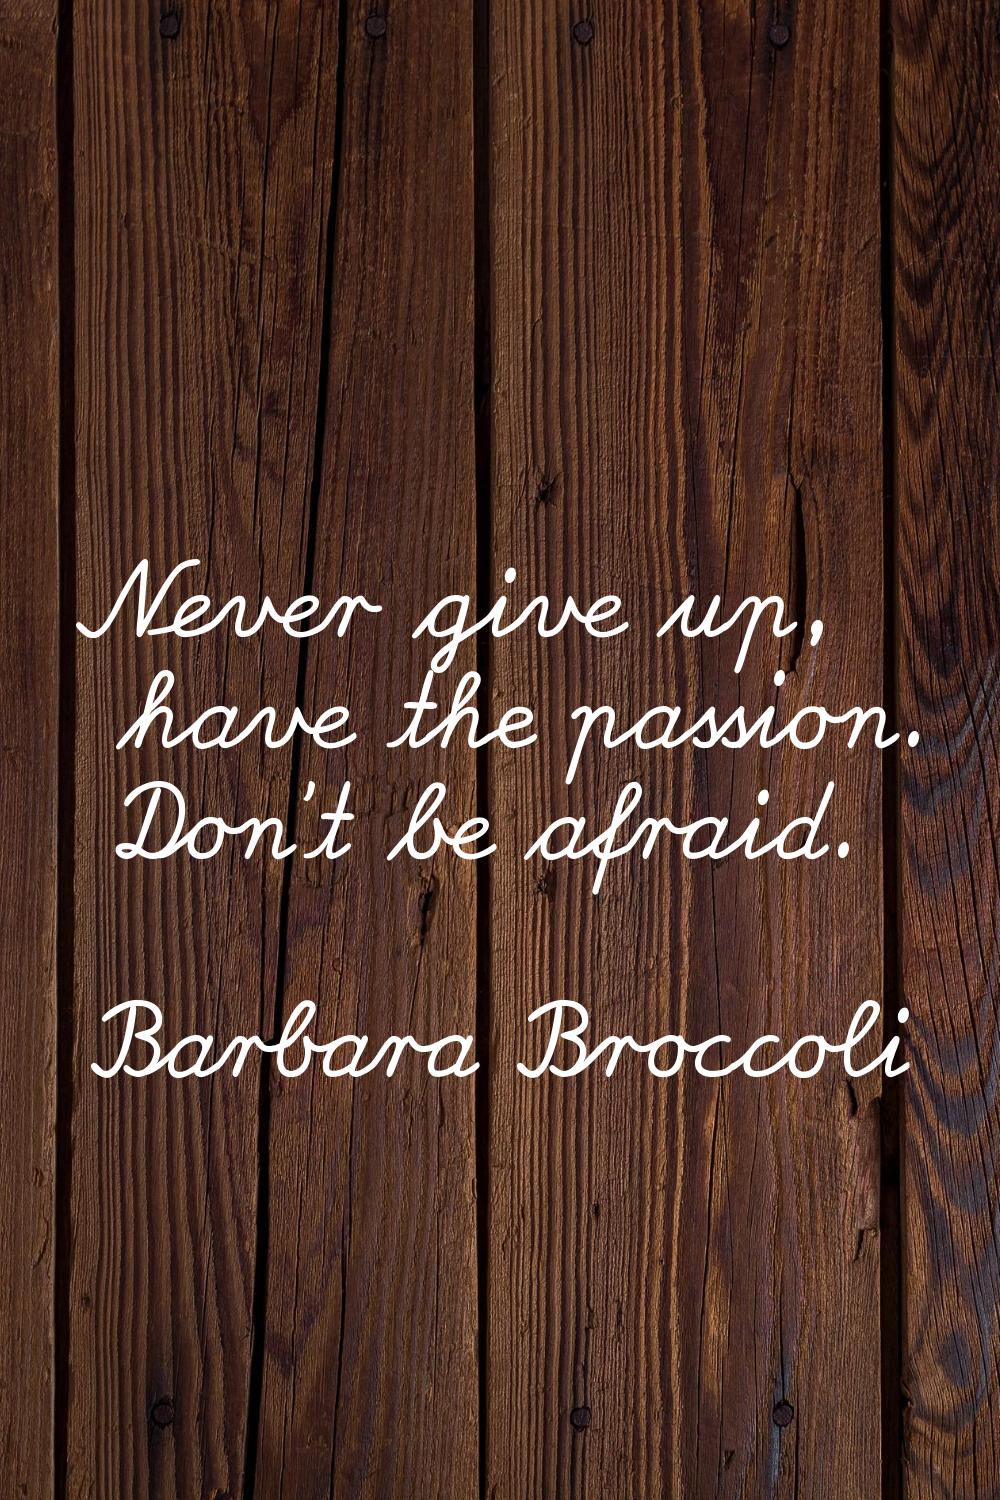 Never give up, have the passion. Don't be afraid.